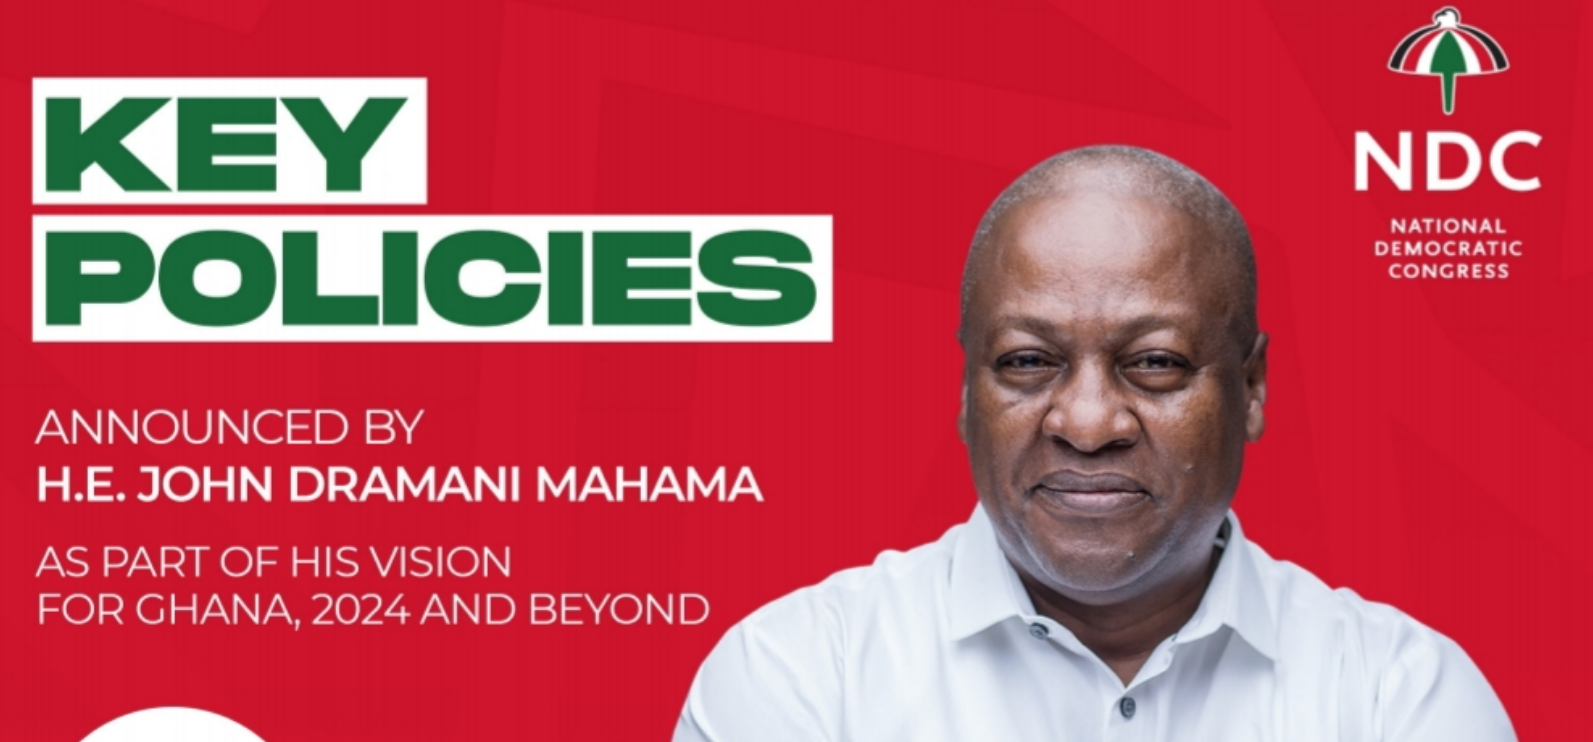 Mahama’s 60 Key policies continue to flood social media owing to its socially inclined nature